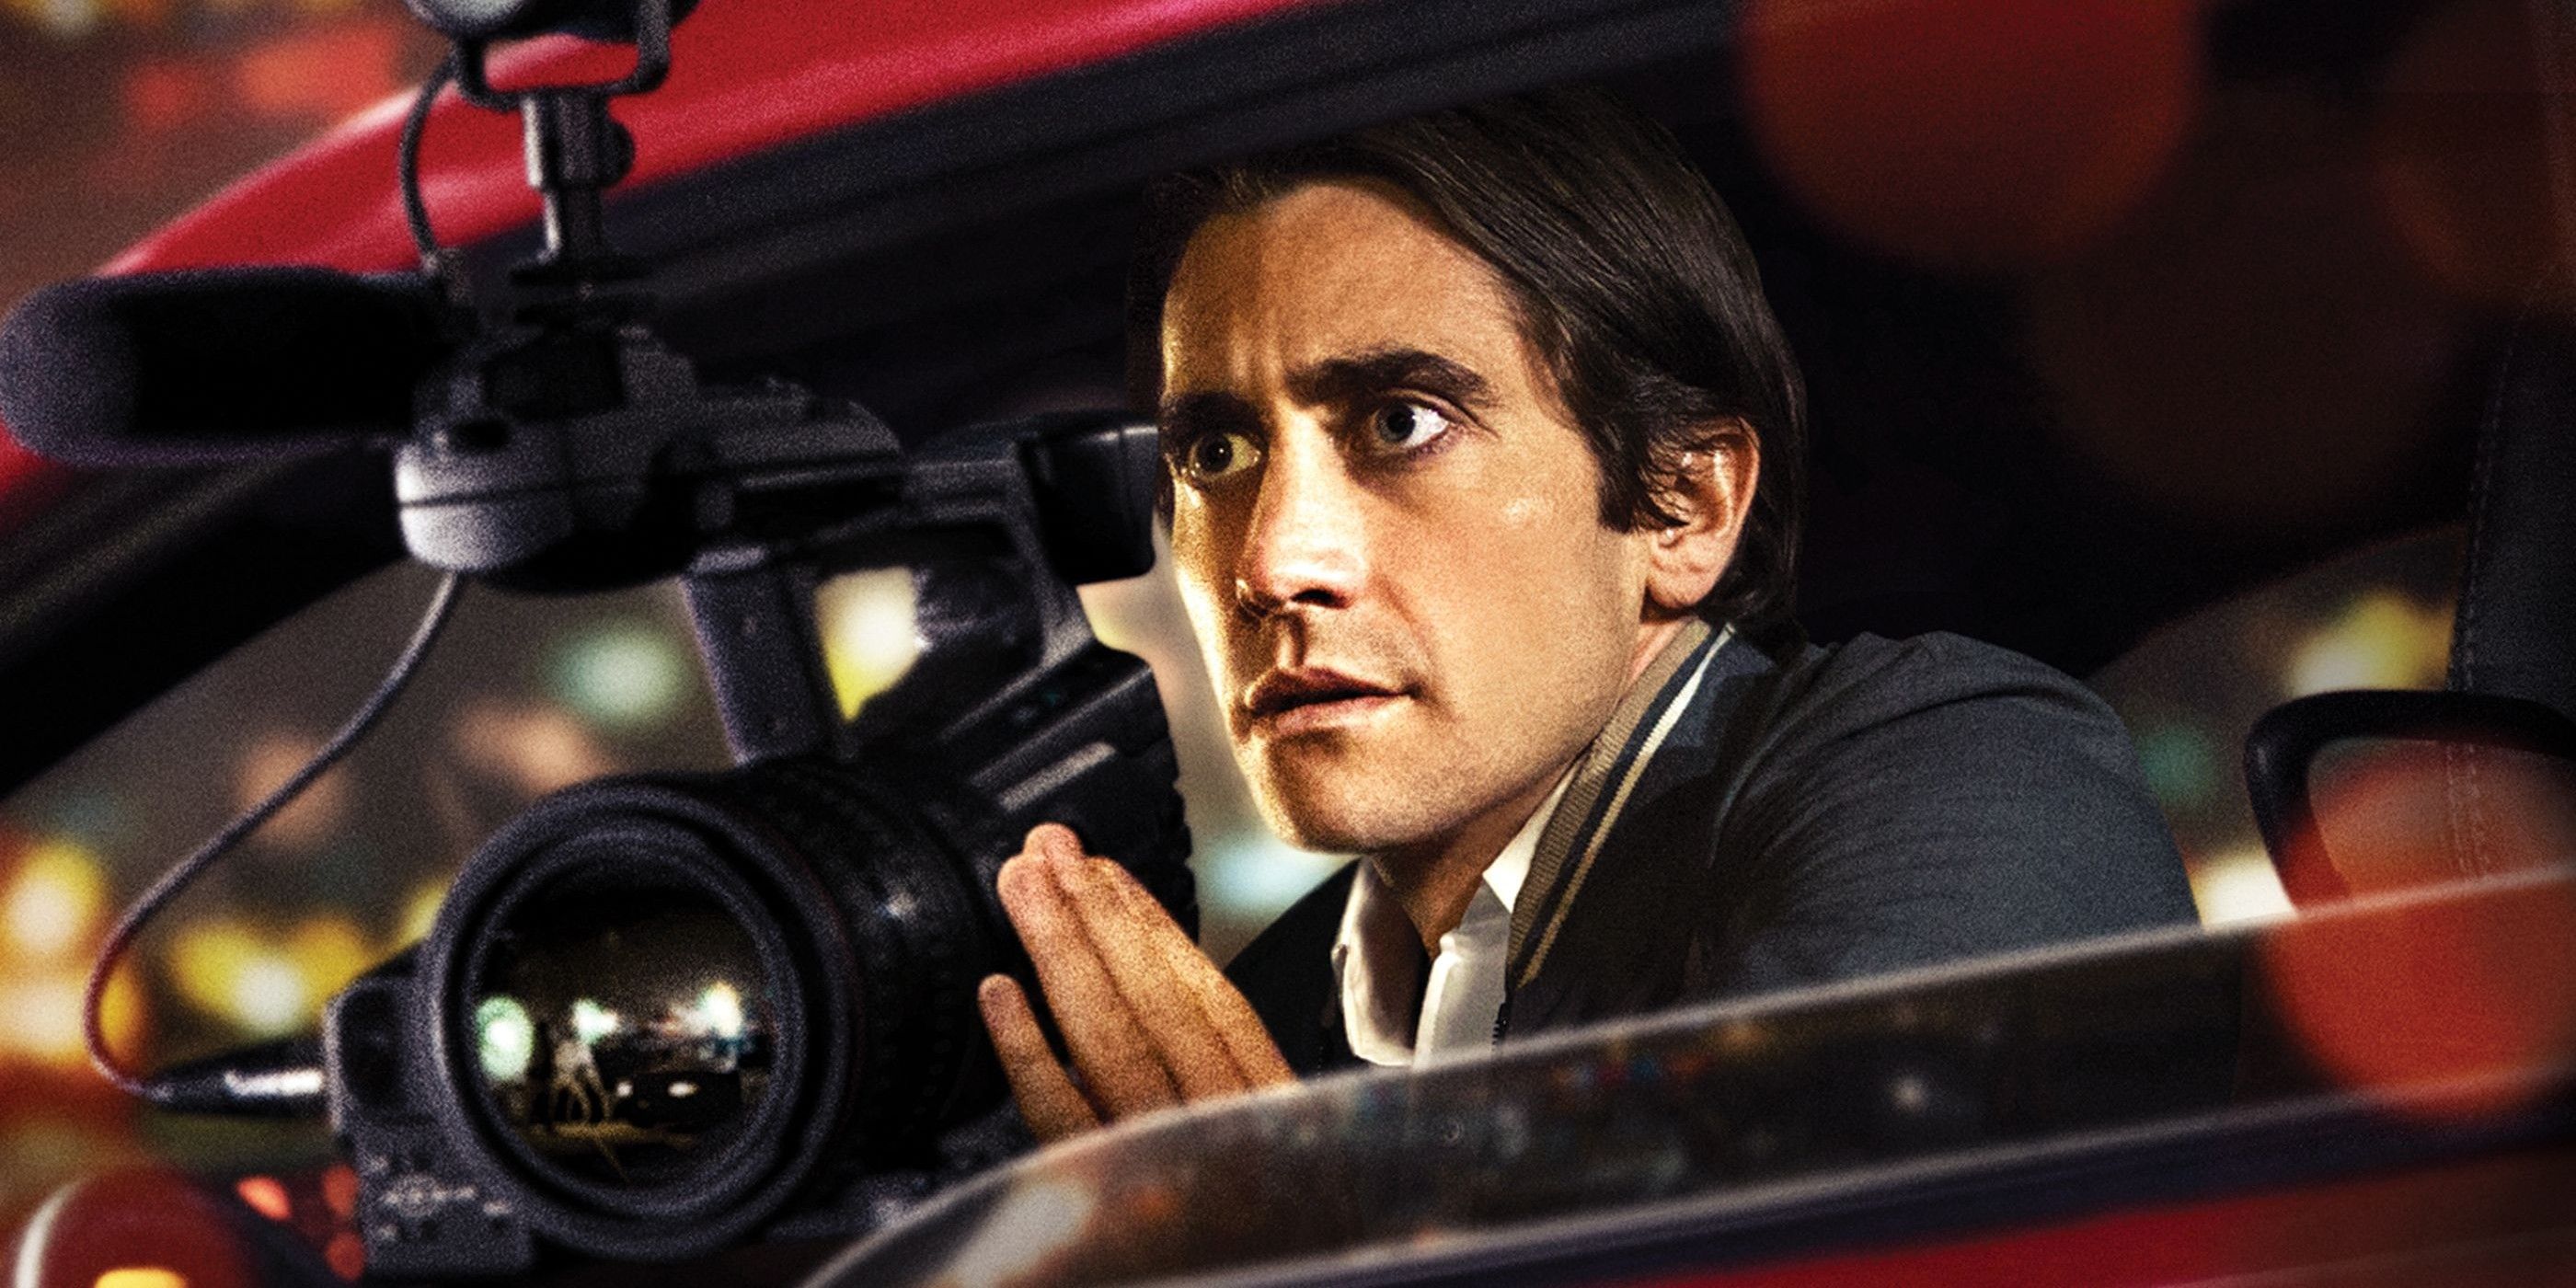 Lou Bloom looking out the window of his car while holding a camera in Nightcrawler Banner